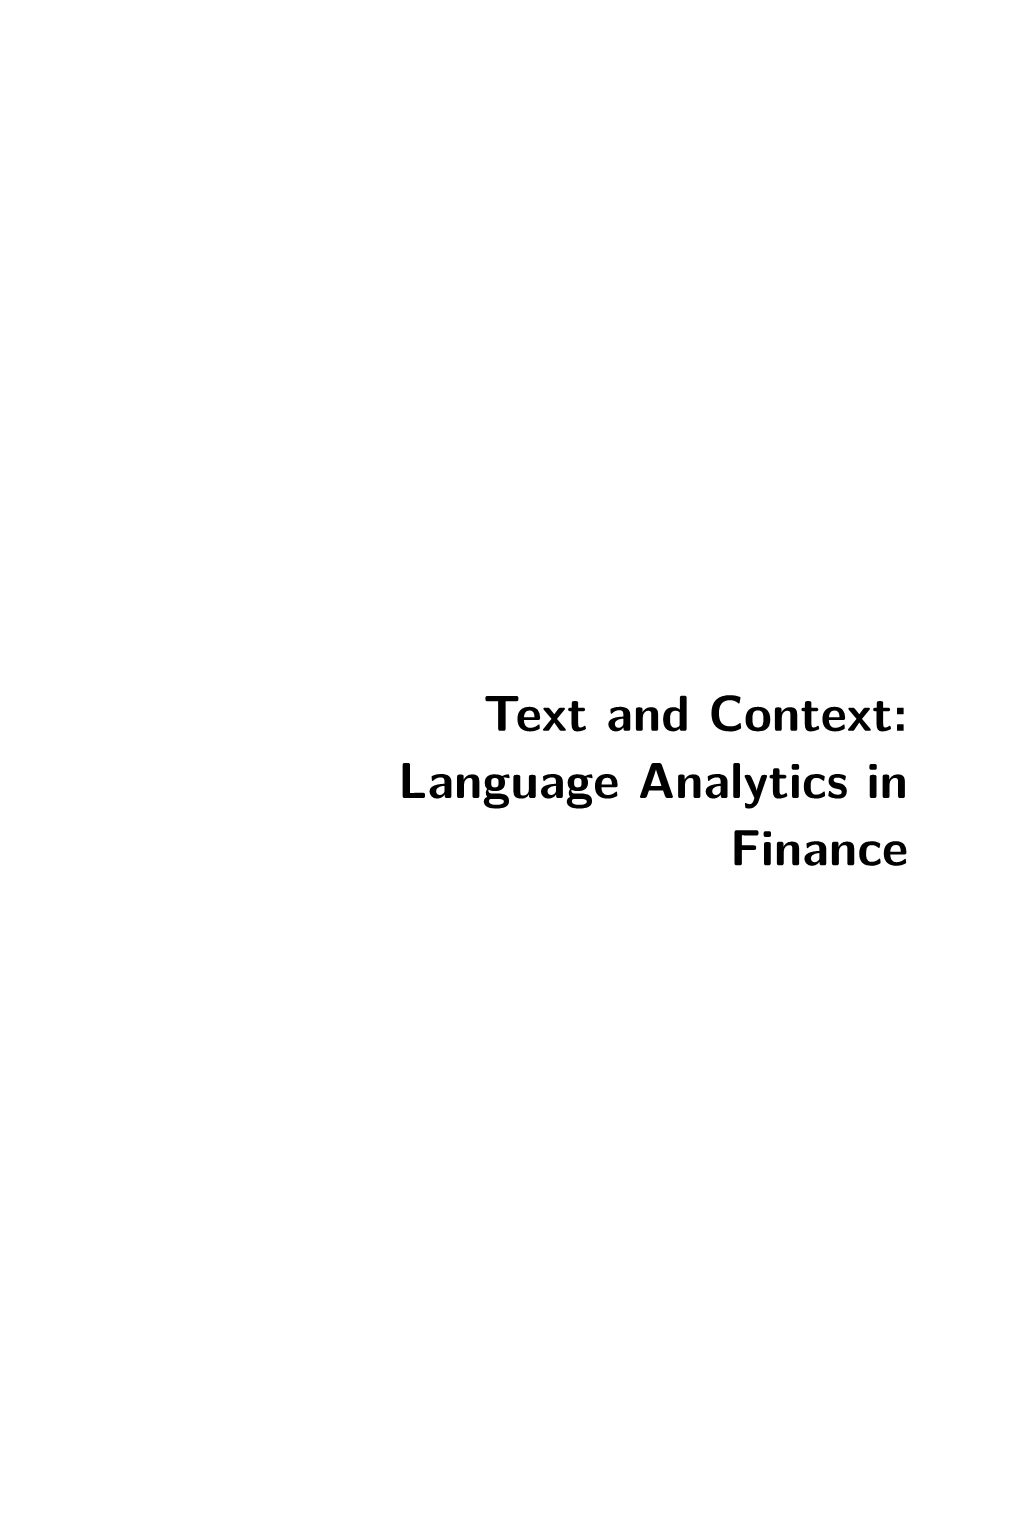 Text and Context: Language Analytics in Finance